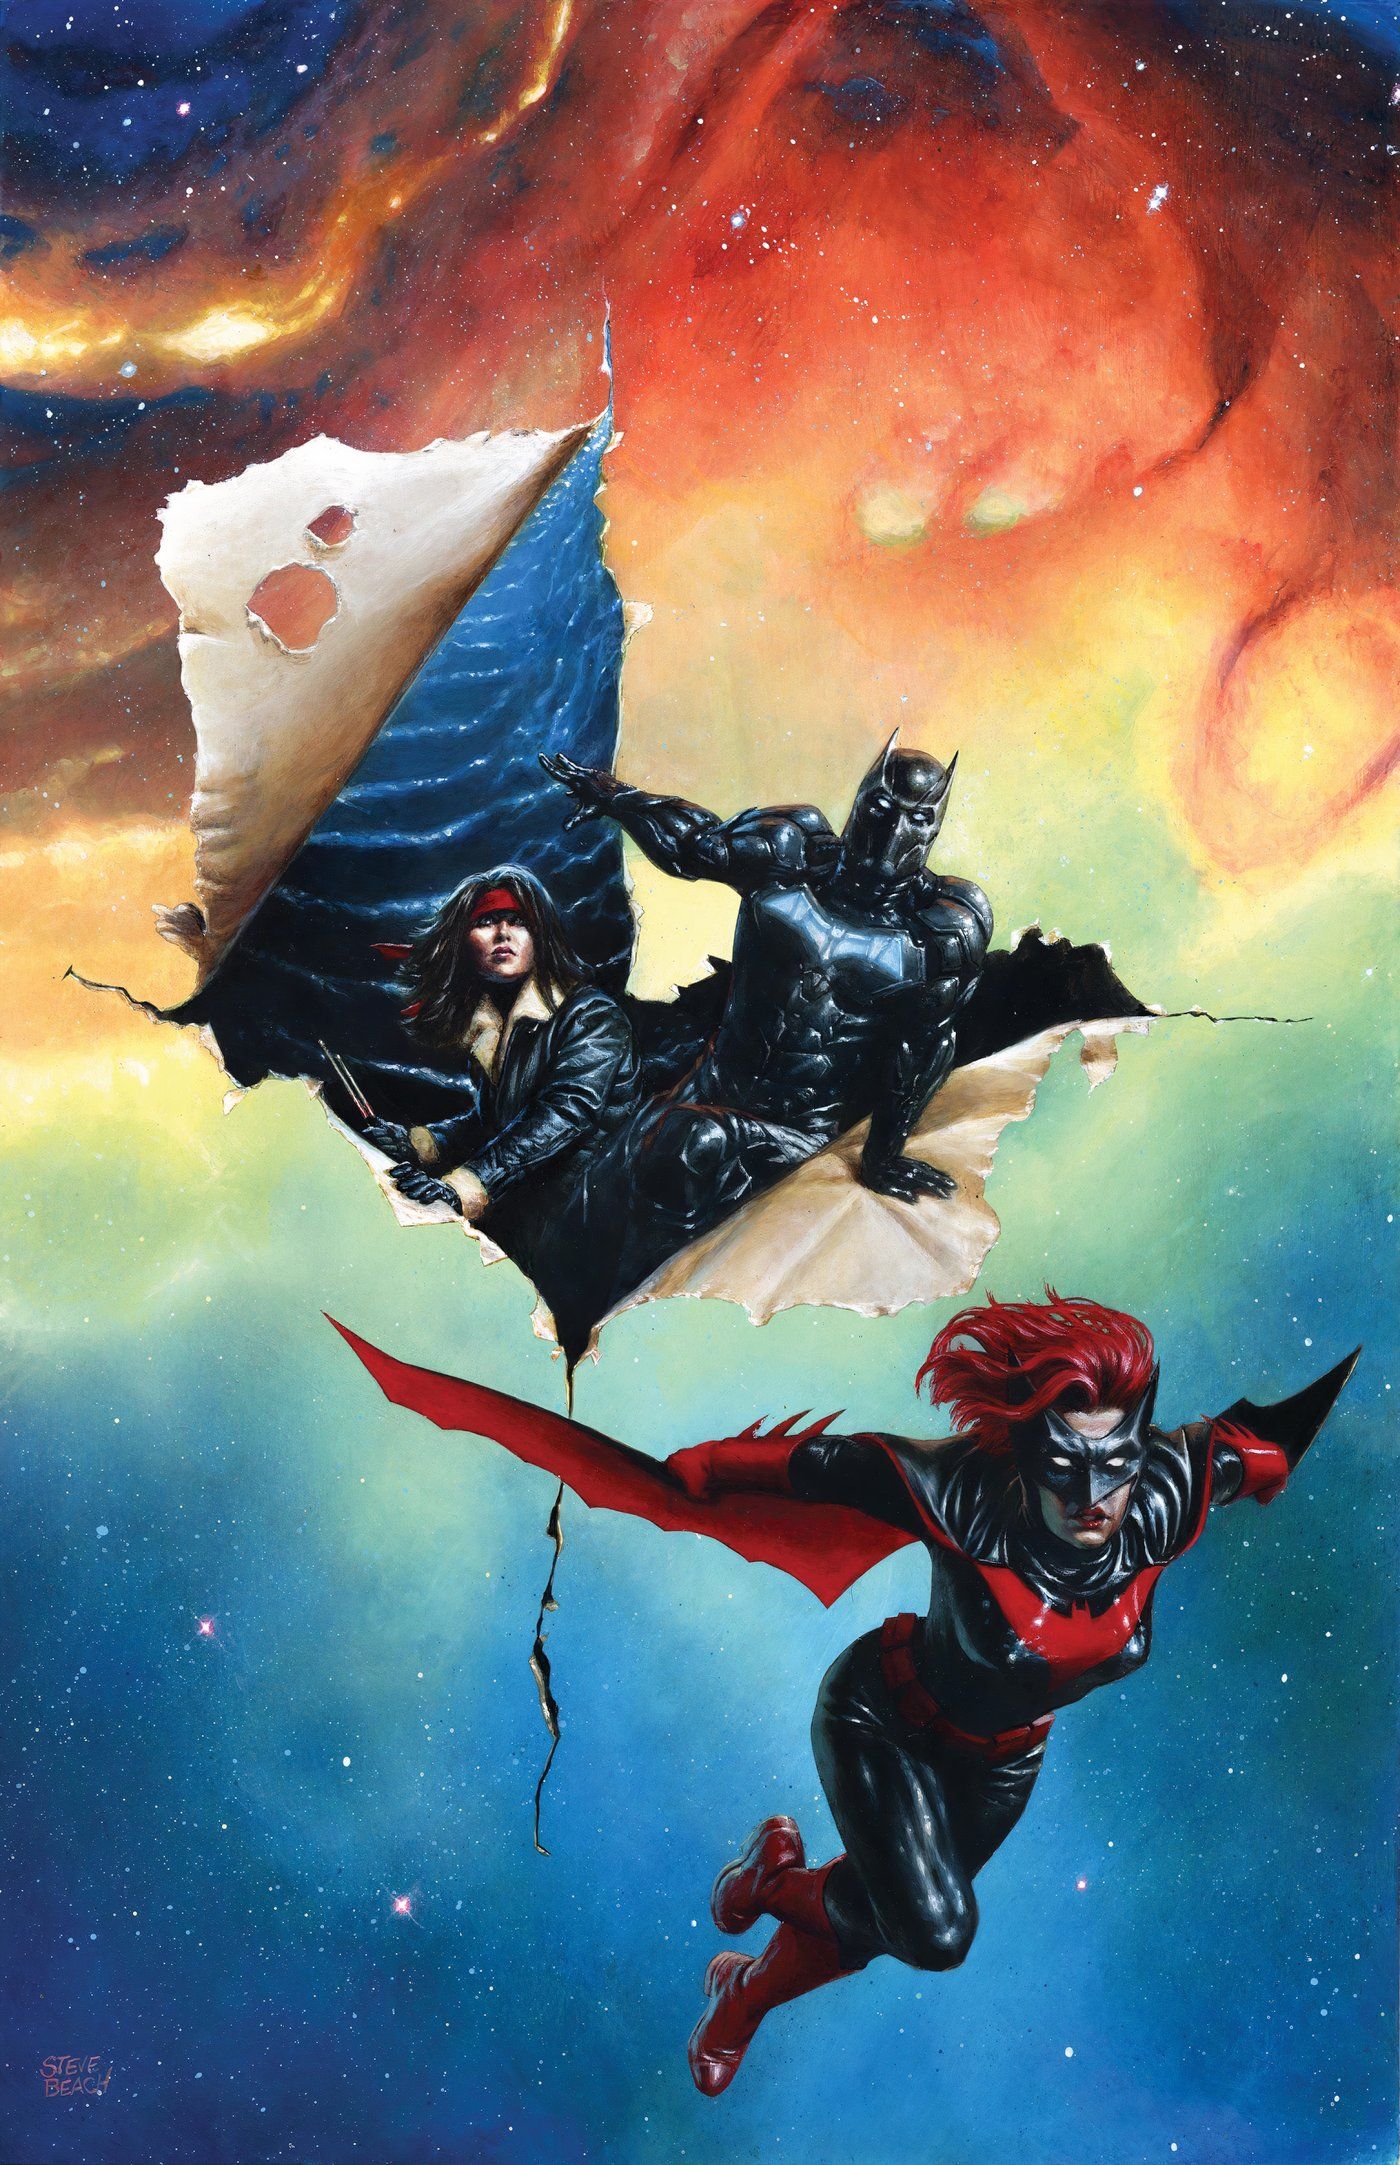 Outsiders 9 Beach Variant Cover: Drummer, Batwing, and Batwoman exploring the universe.